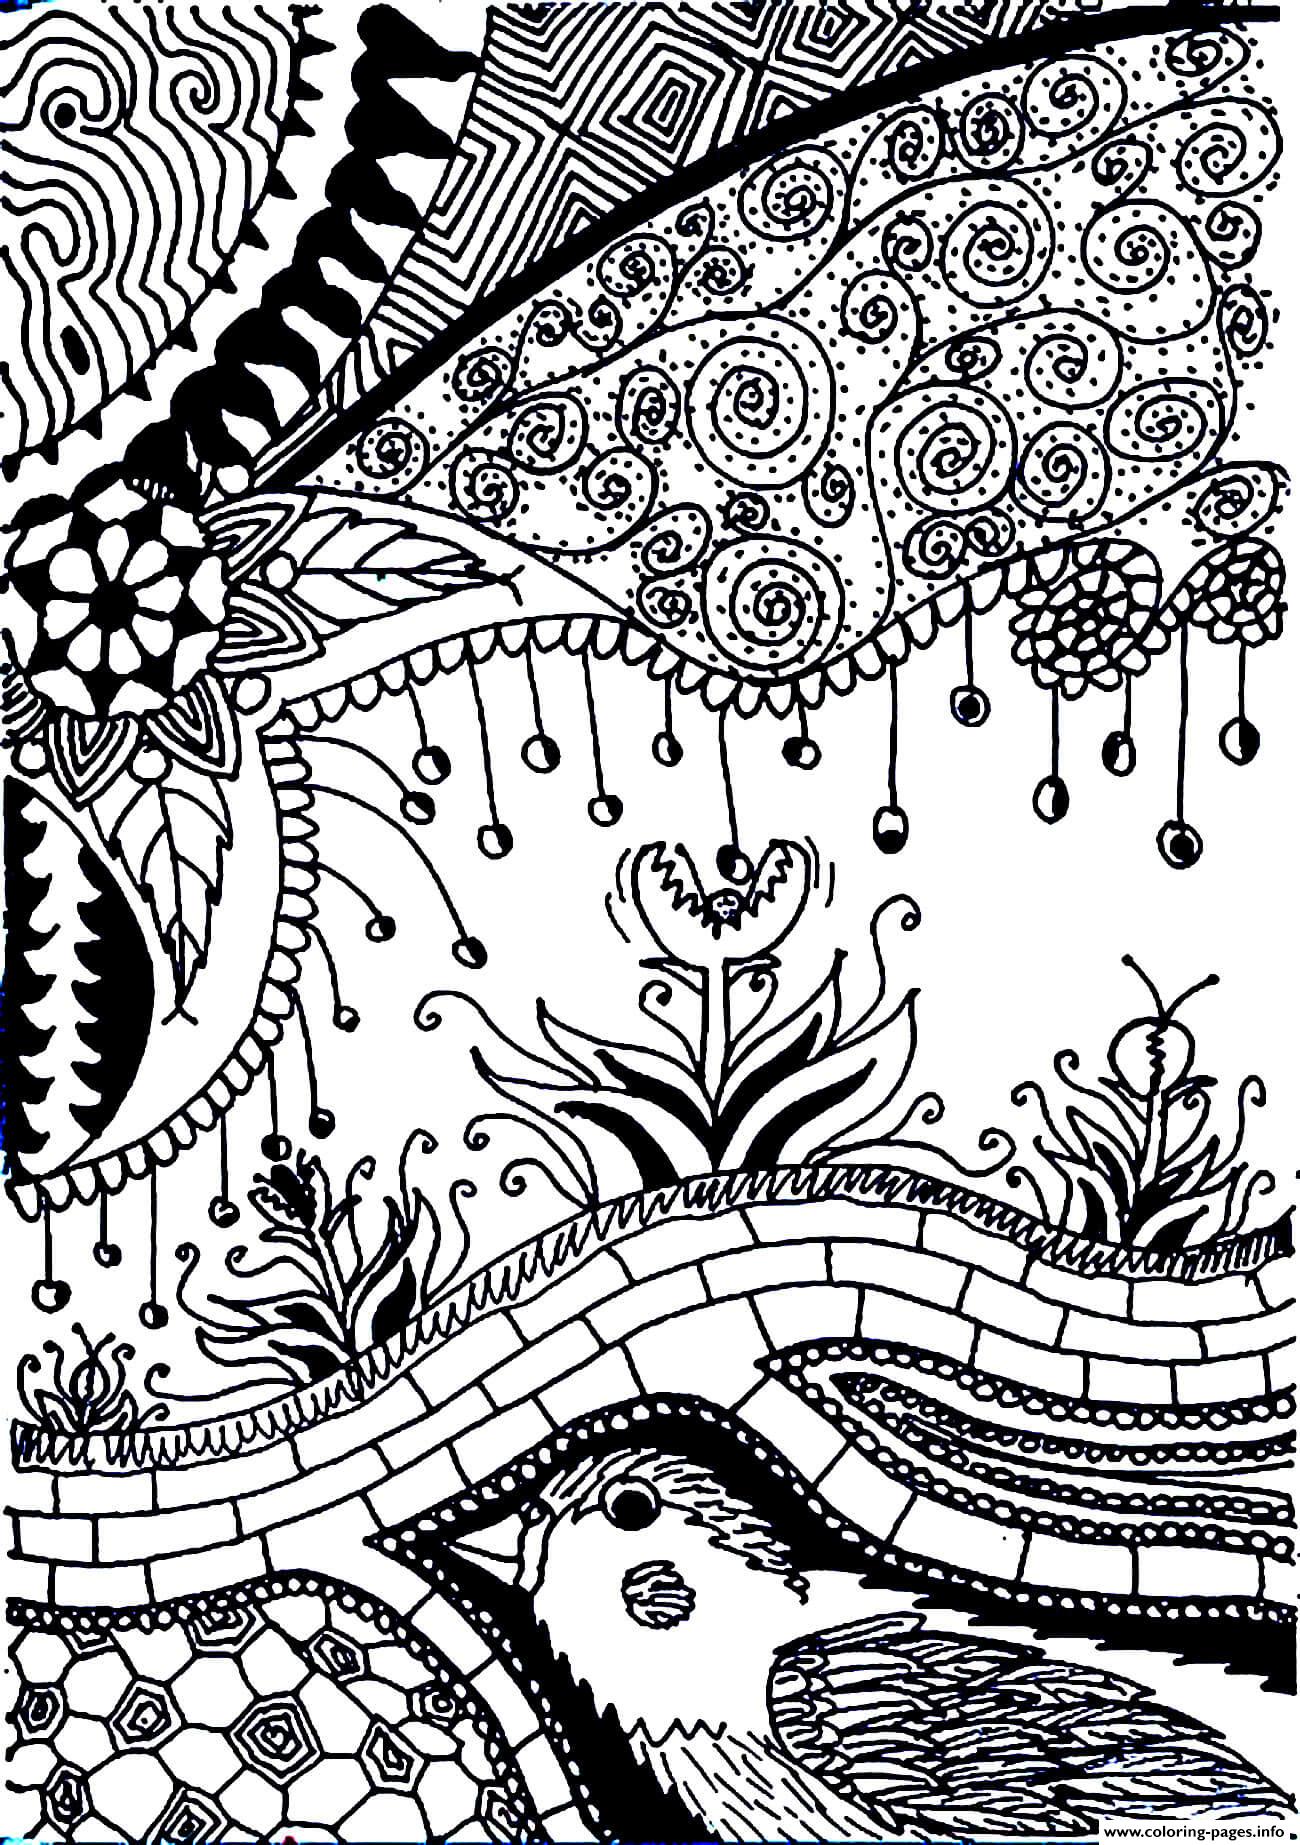 coloring adult flower adults carnivorous zentangle flowers doodle doodles printable drawings classroom patterns vegetation tangle muster meeting zen drawing doodling